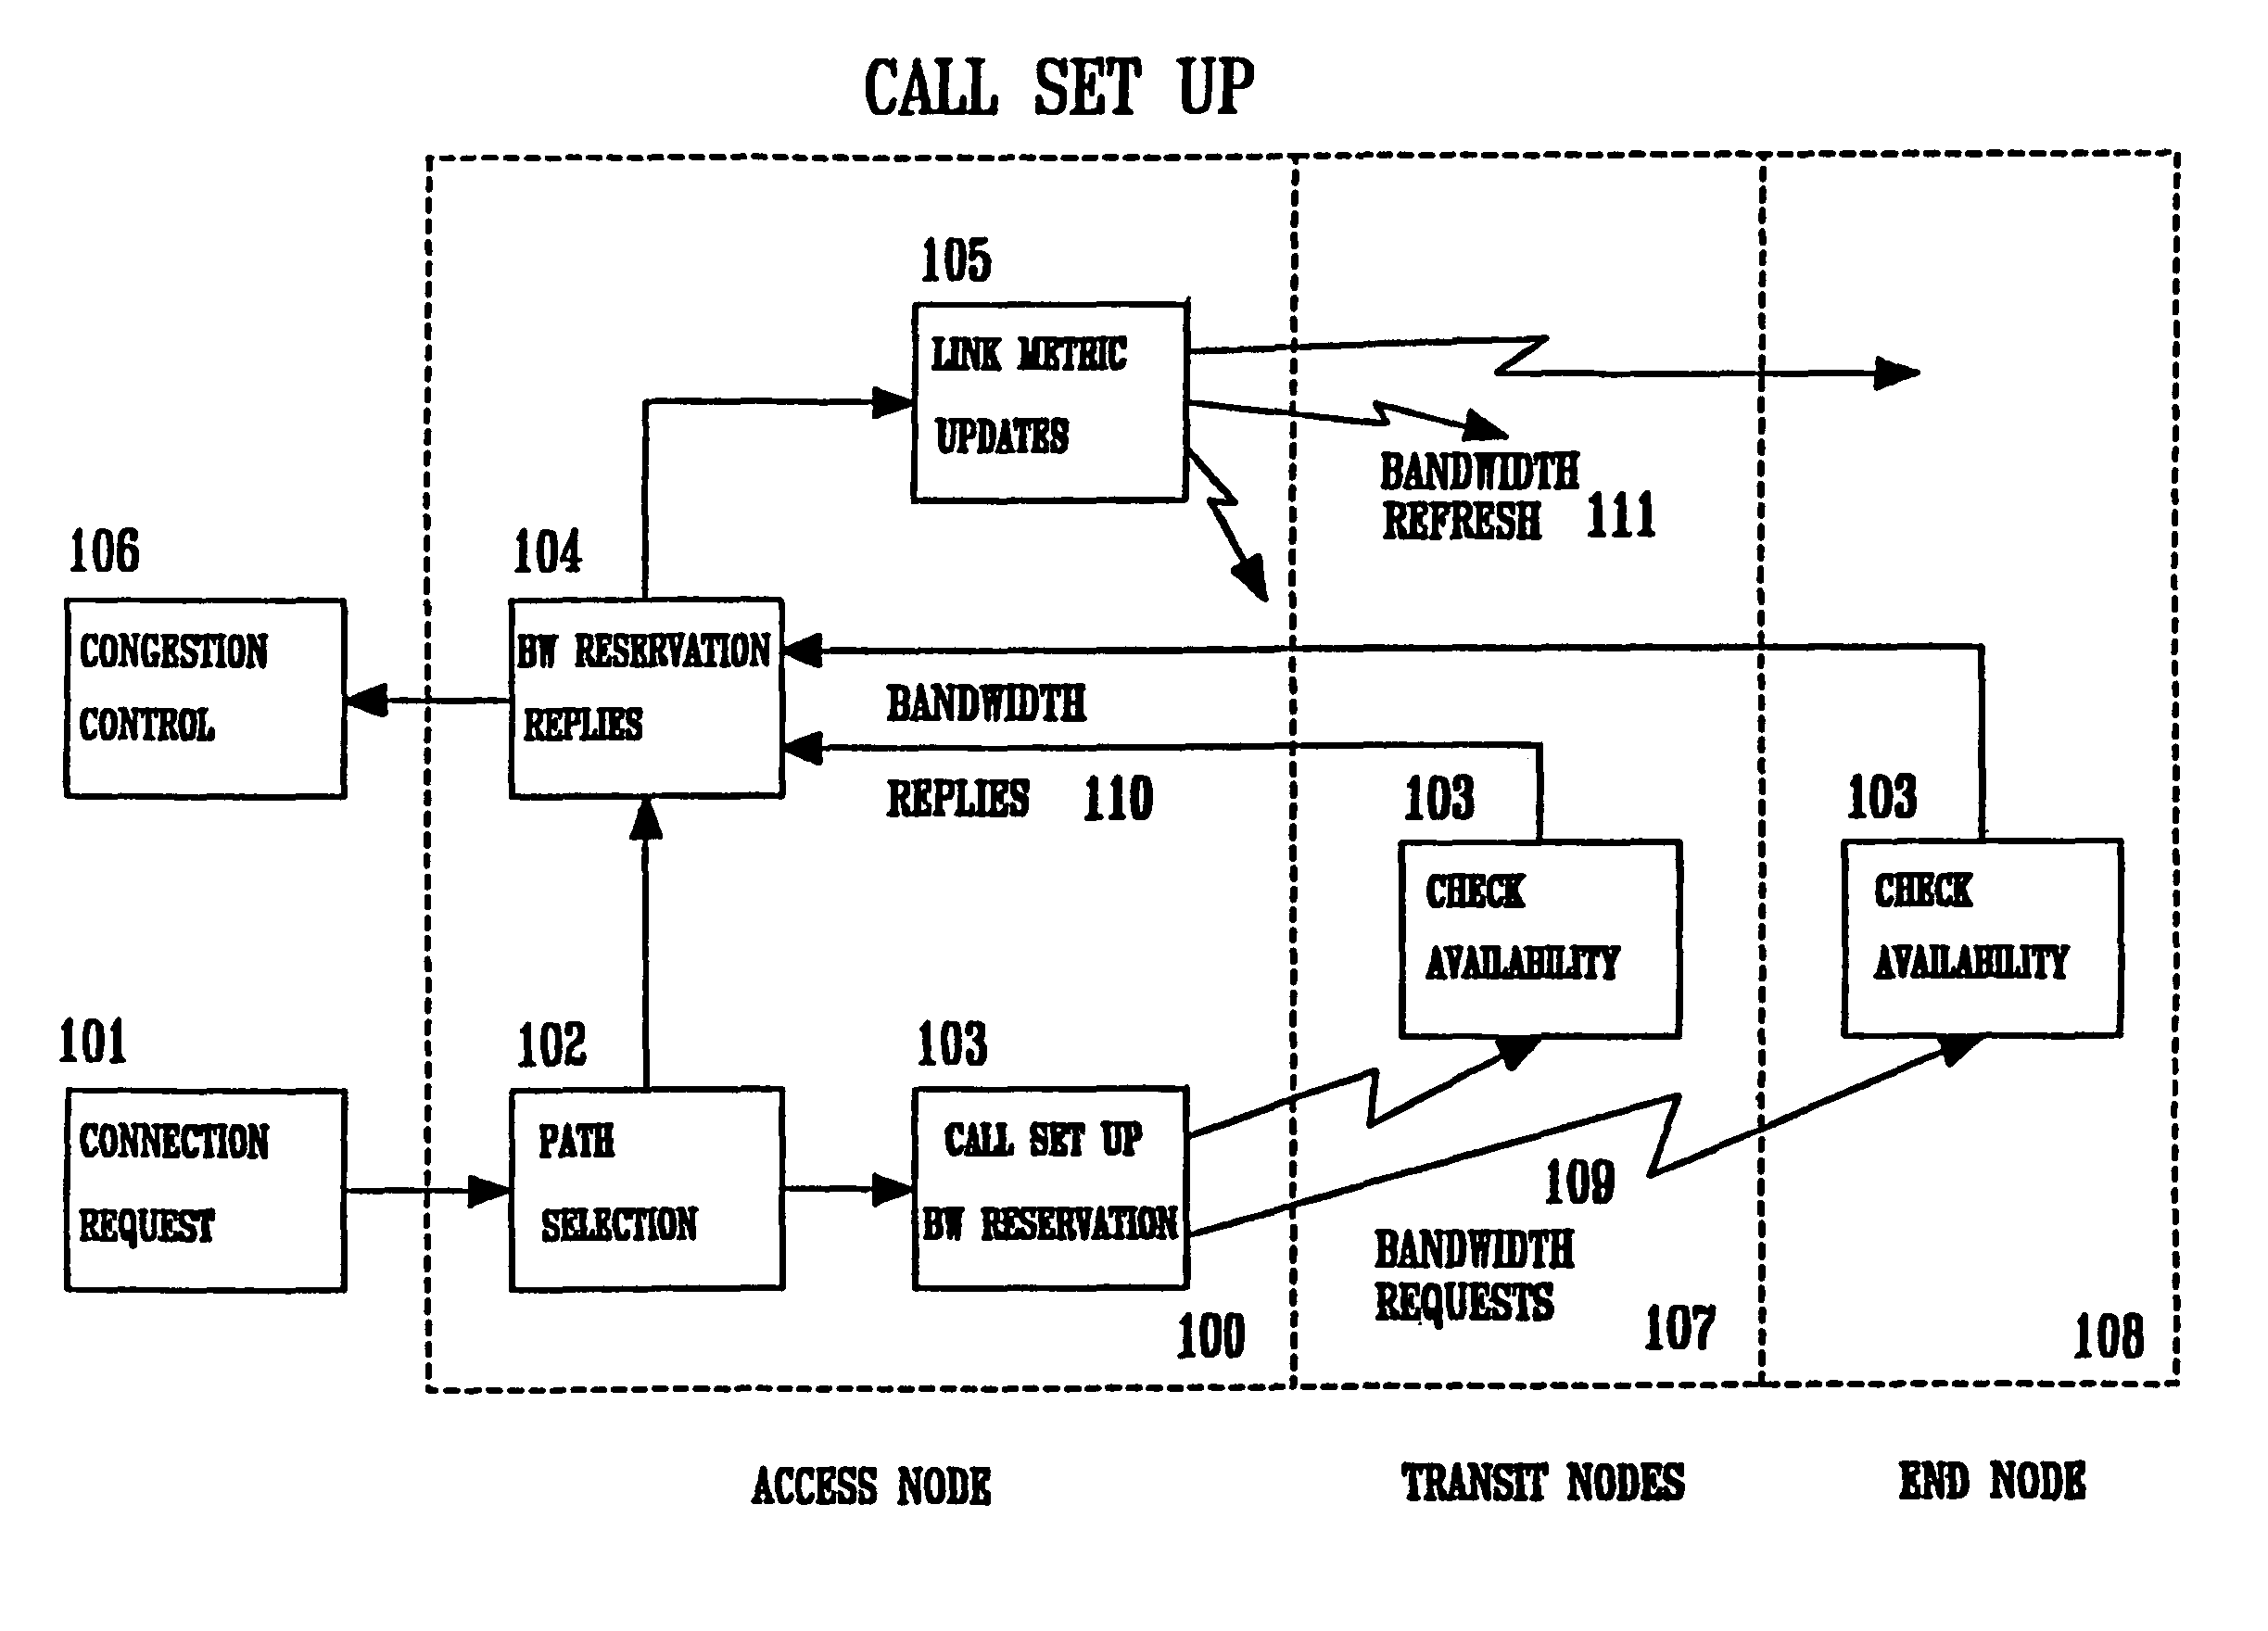 Method and system for a local and fast non-disruptive path switching in high speed packet switching networks